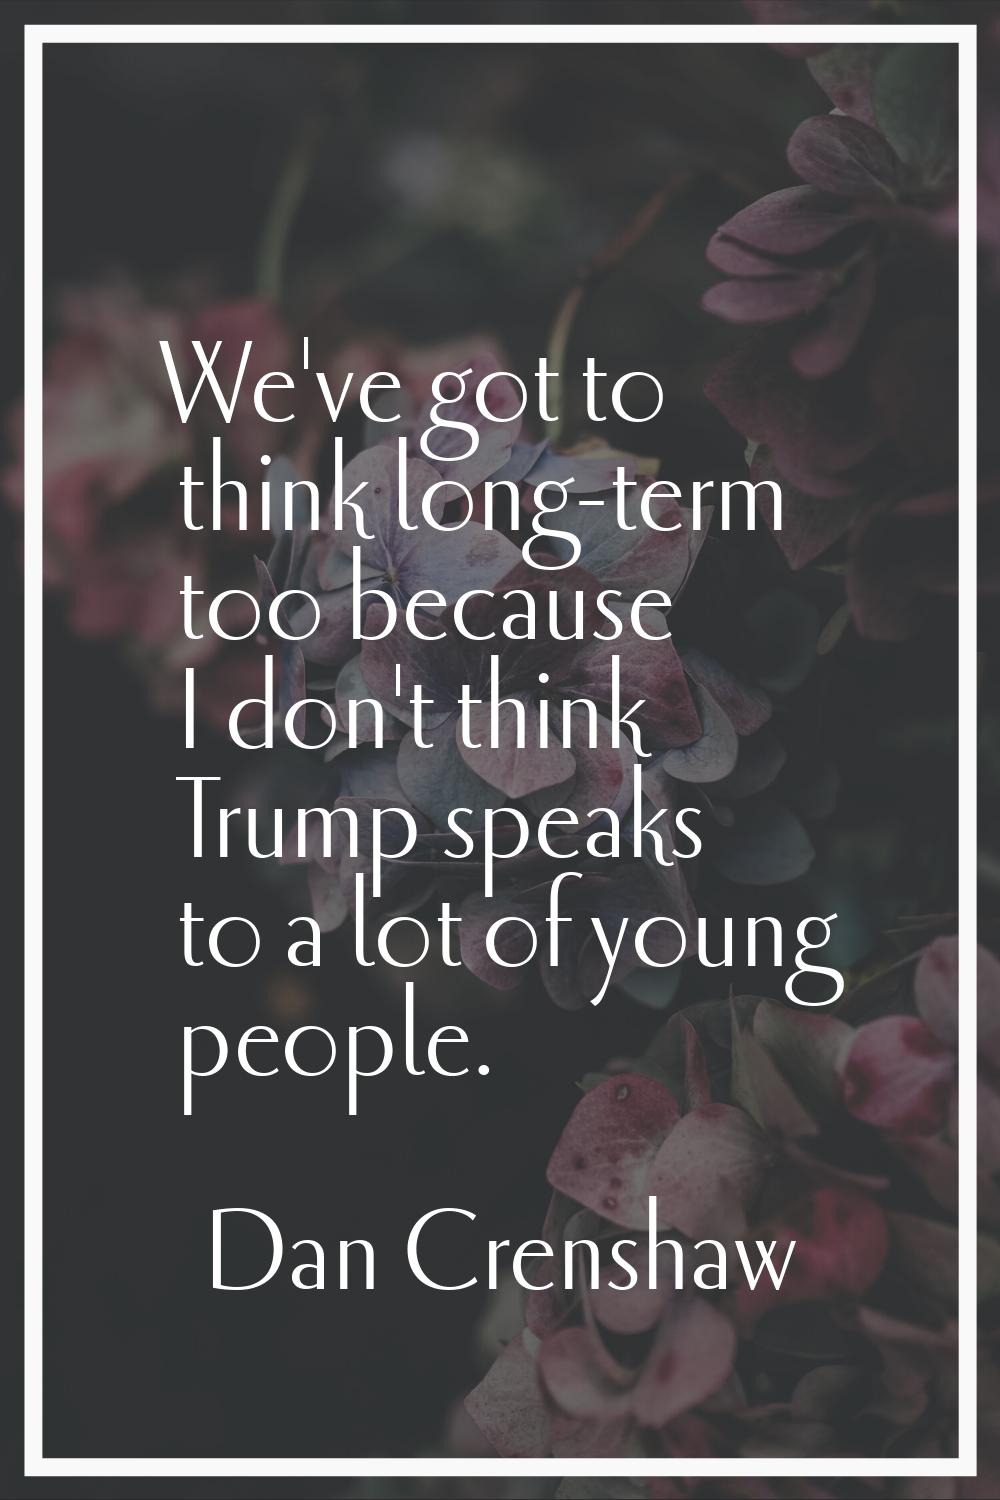 We've got to think long-term too because I don't think Trump speaks to a lot of young people.